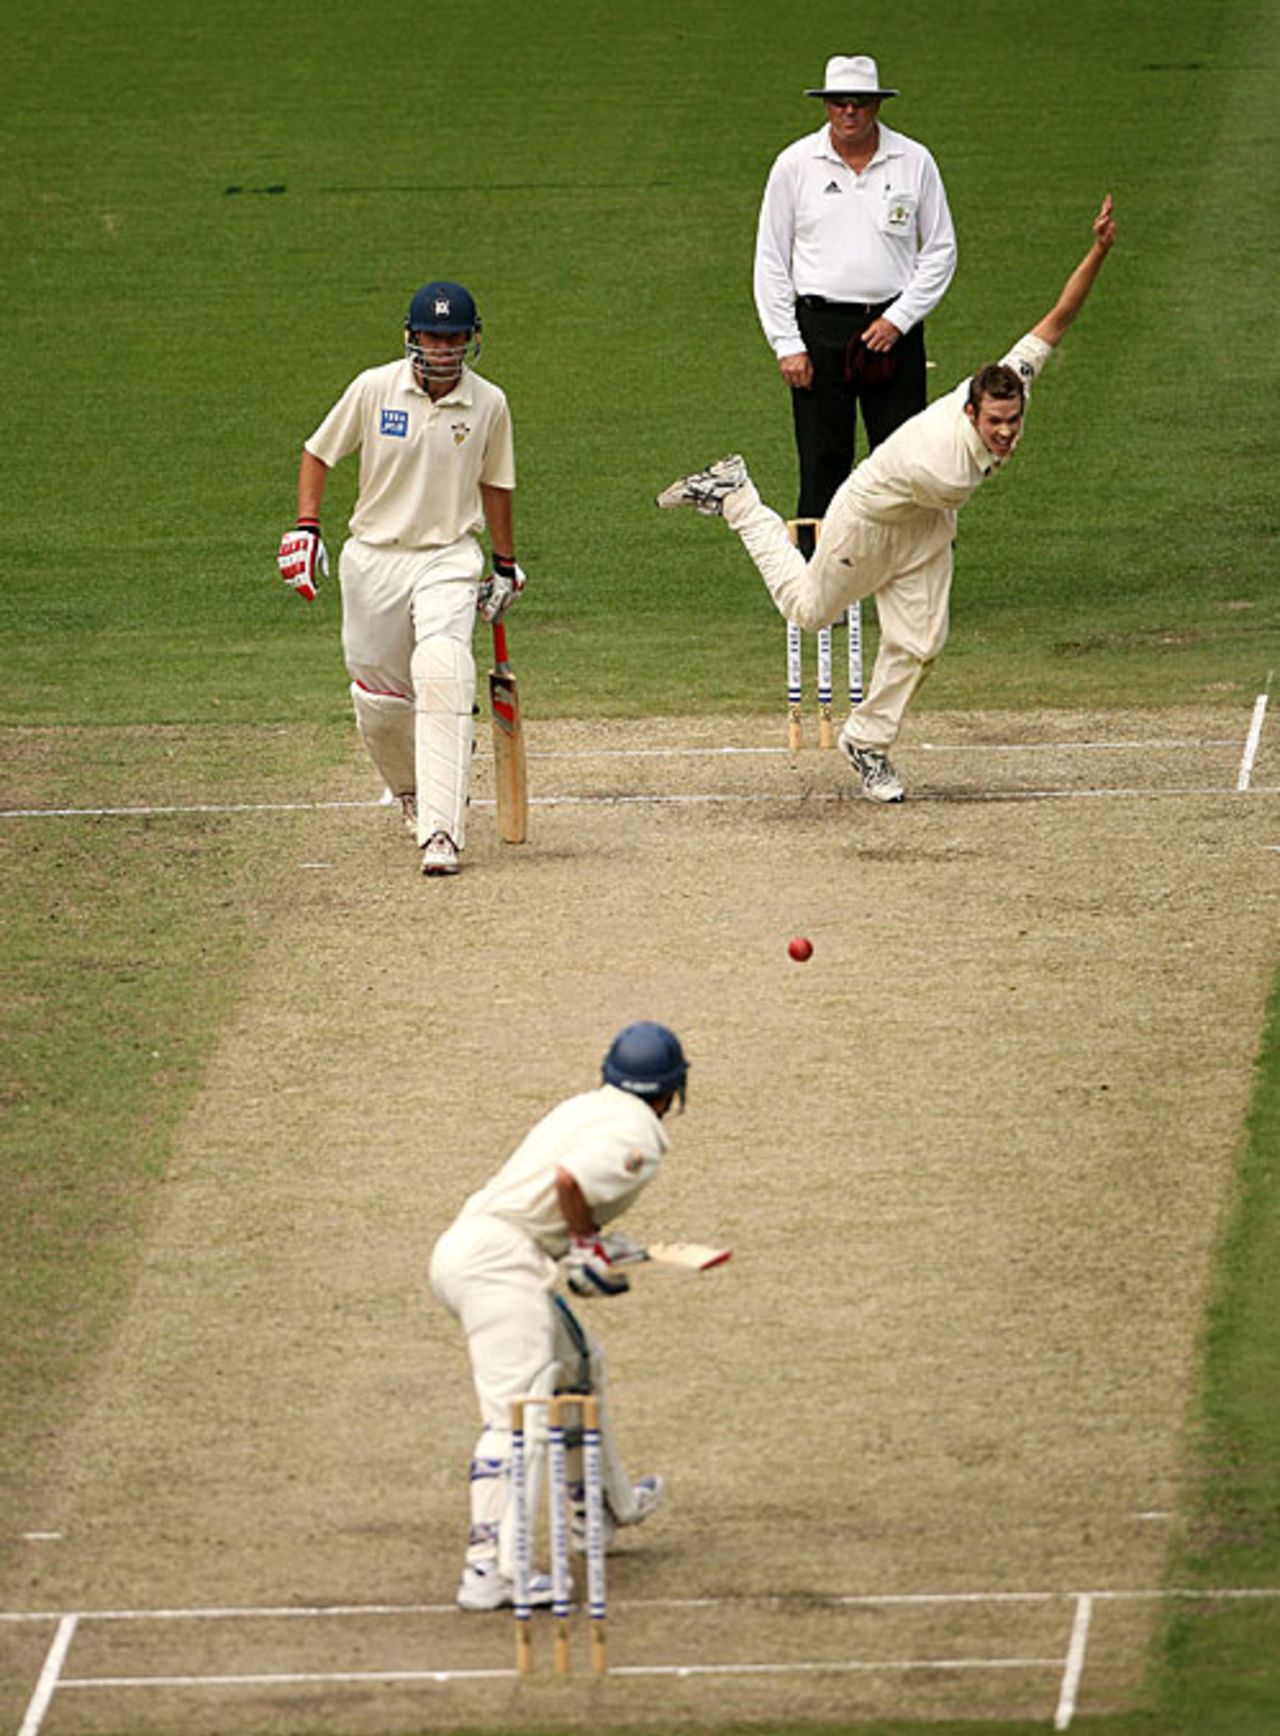 Debutant Ben Laughlin bowls a delivery, Victoria v Queensland, Pura Cup, 2nd day, MCG, March 8, 2008